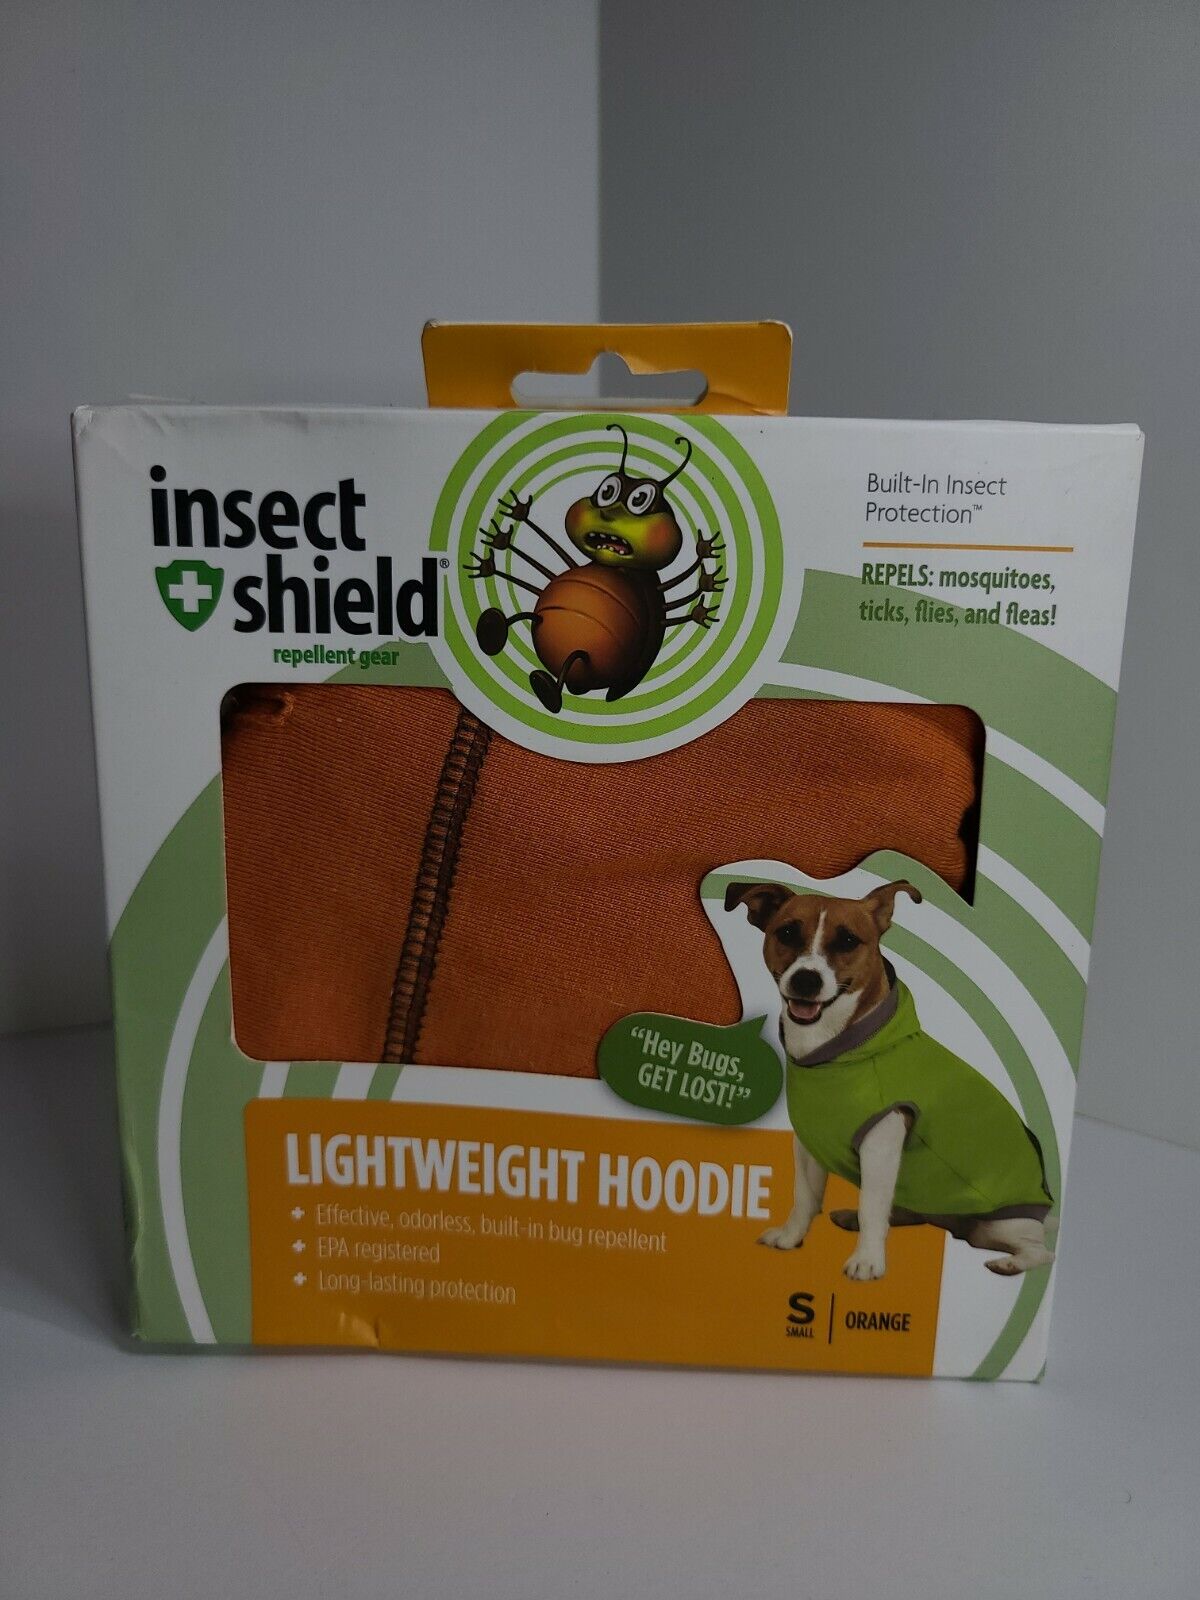 Insect Shield Repellent Gear Lightweight Hoodie for Dogs Orange Small NEW